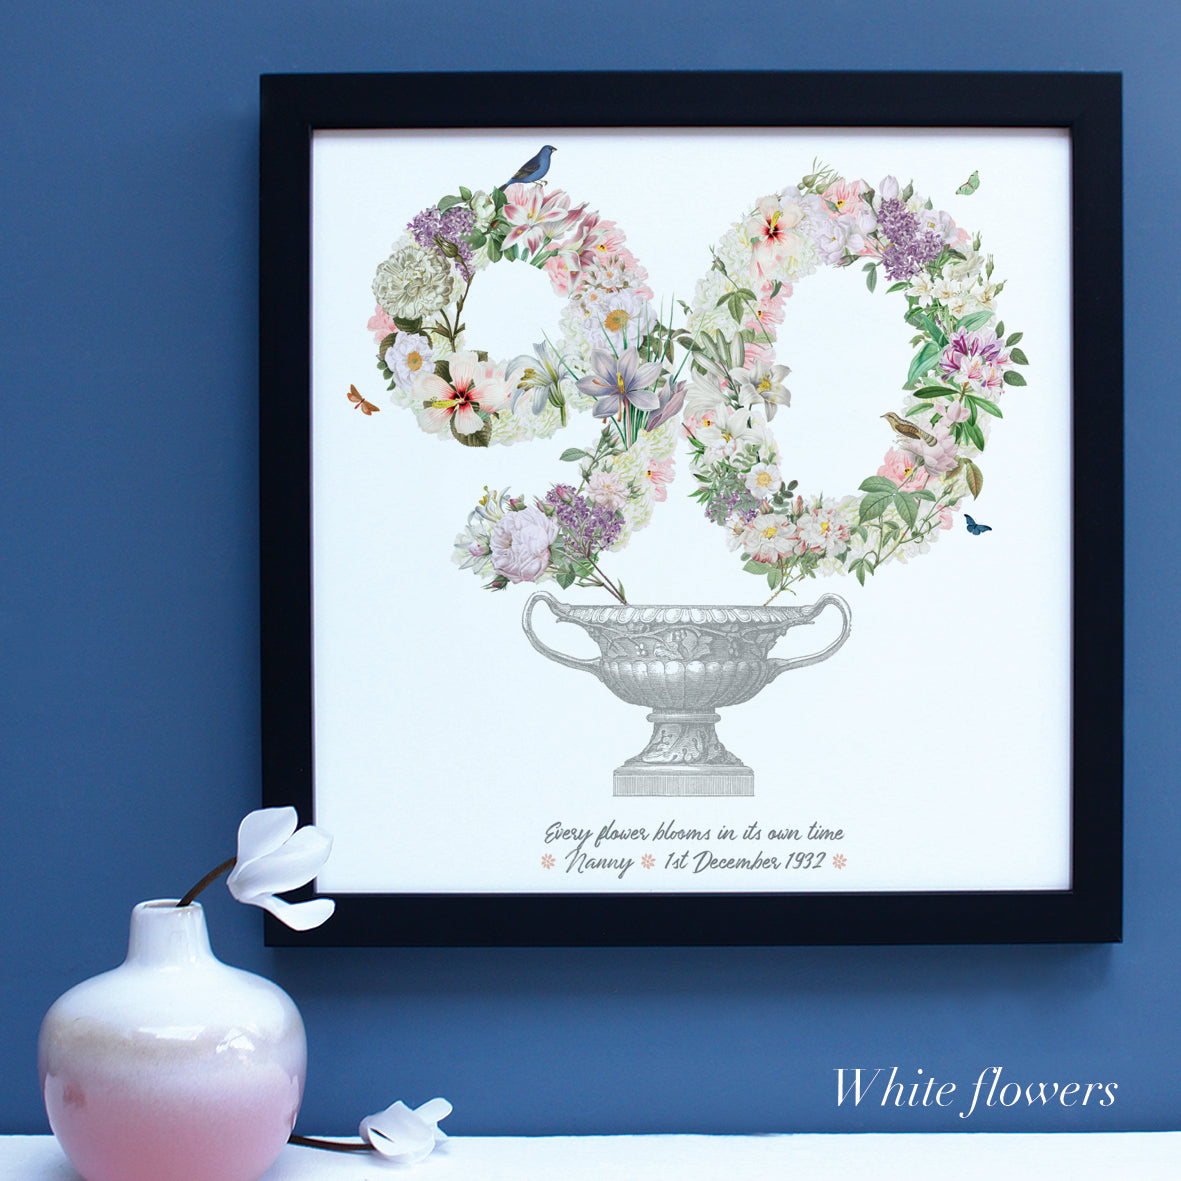 90th birthday gift framed print with white flowers in a black frame